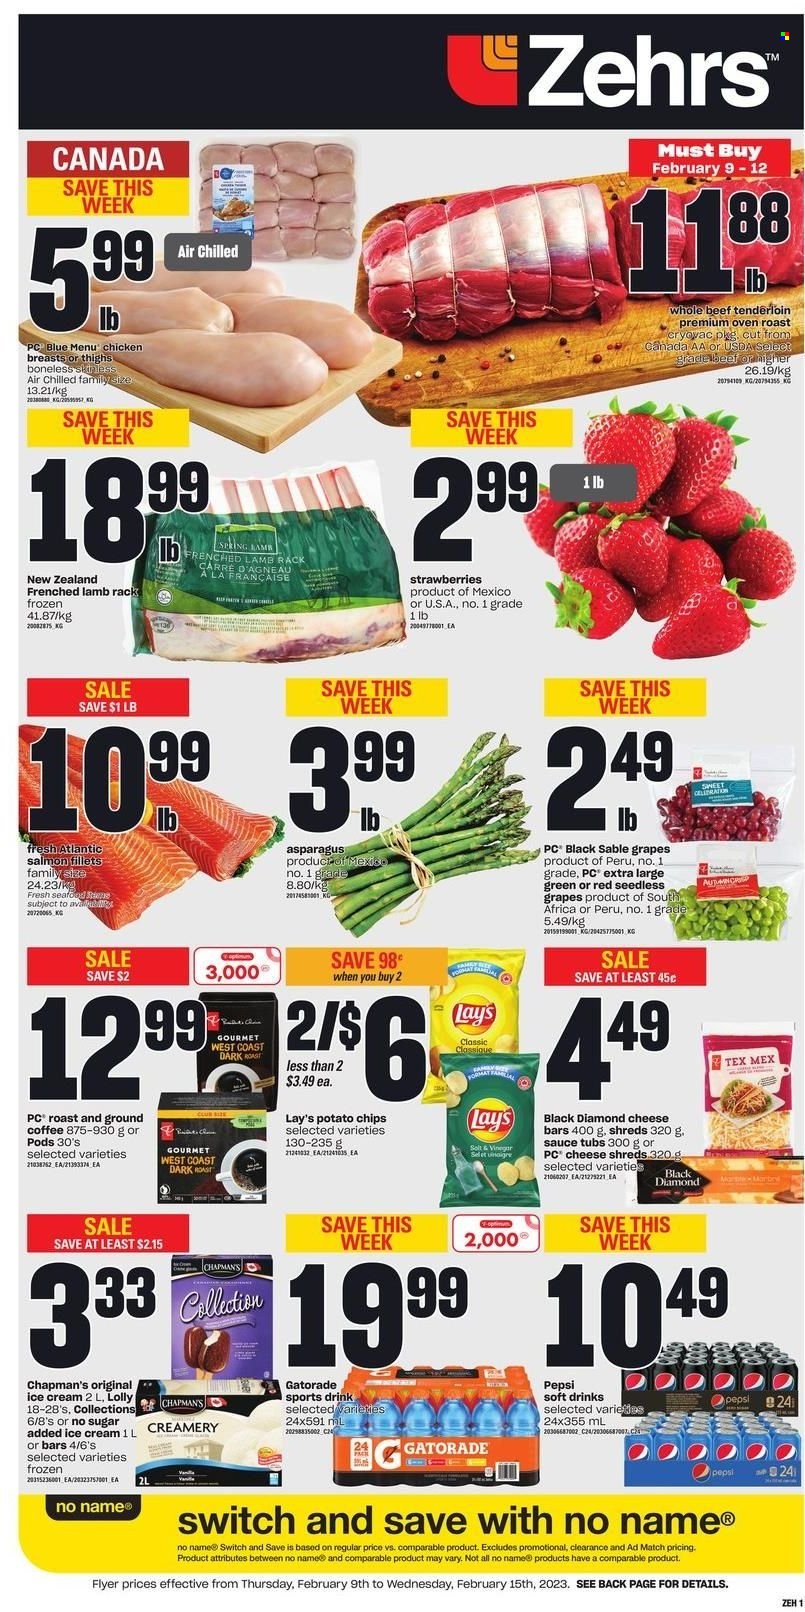 thumbnail - Zehrs Flyer - February 09, 2023 - February 15, 2023 - Sales products - asparagus, grapes, seedless grapes, strawberries, salmon, salmon fillet, seafood, No Name, sauce, ice cream, lollipop, potato chips, Lay’s, Pepsi, soft drink, Gatorade, coffee, ground coffee, chicken breasts, beef meat, beef tenderloin. Page 1.